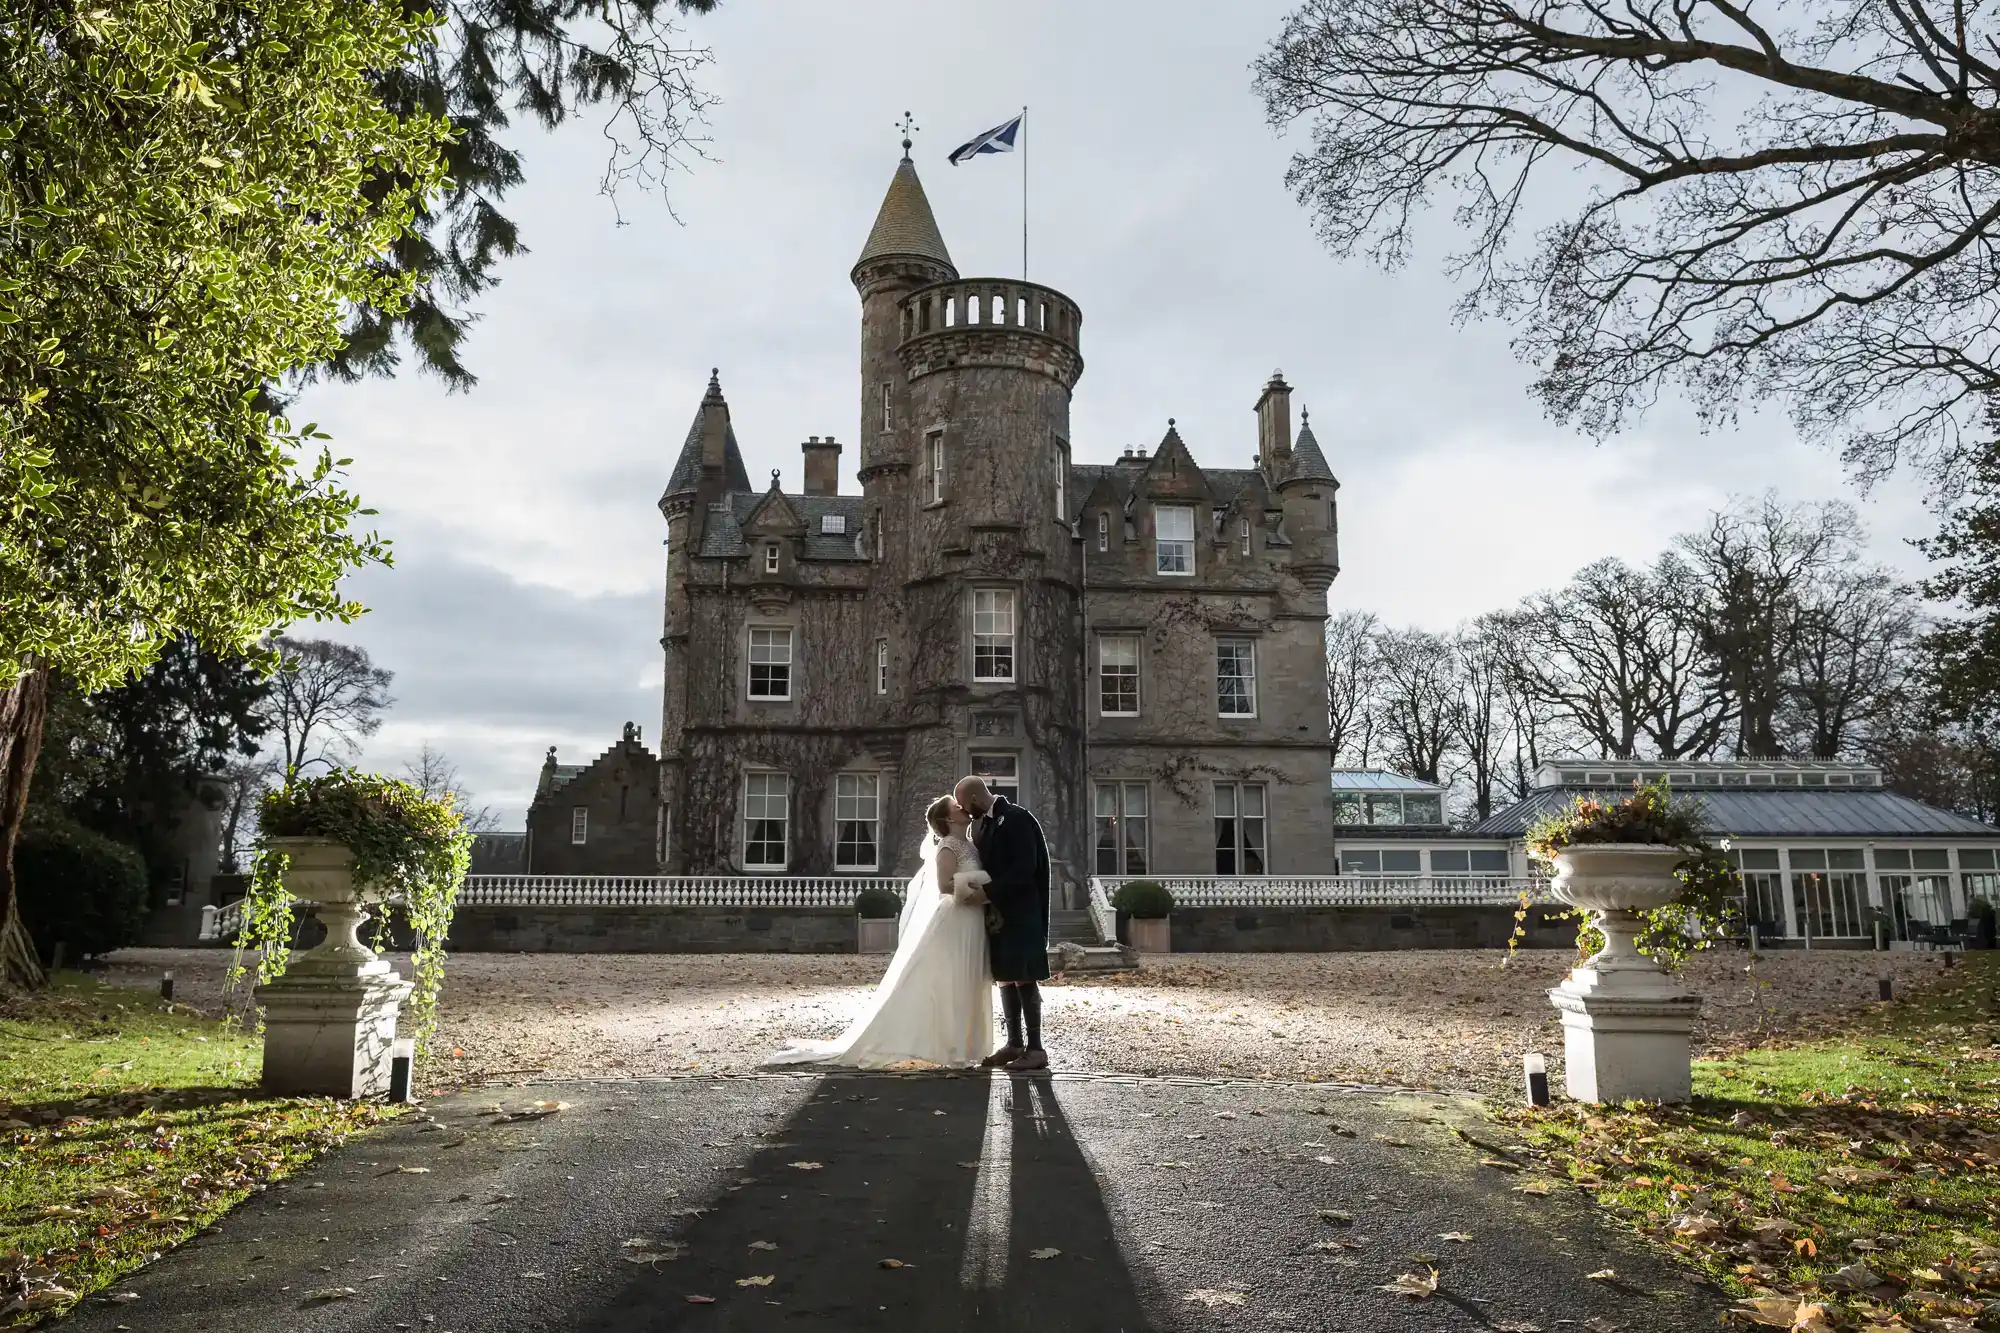 A couple dressed in wedding attire stands in front of a large, historic castle with a flag on top. Trees and greenery surround the area, and the sun casts long shadows on the ground.